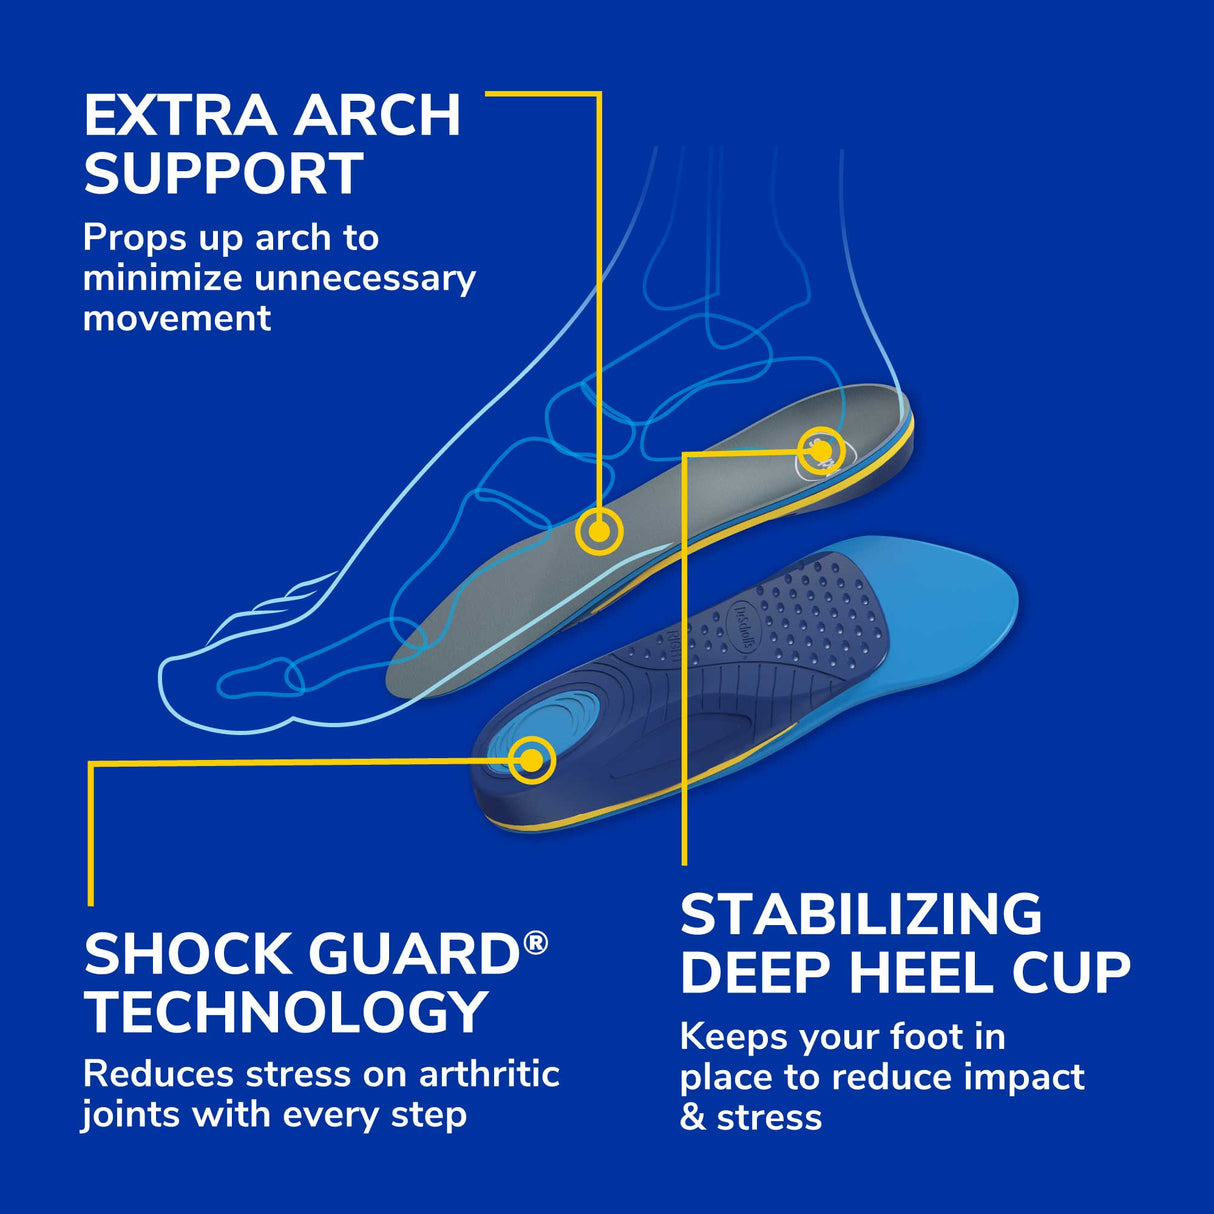 image of extra arch support, shock guard technology and stabilizing deep heel cup